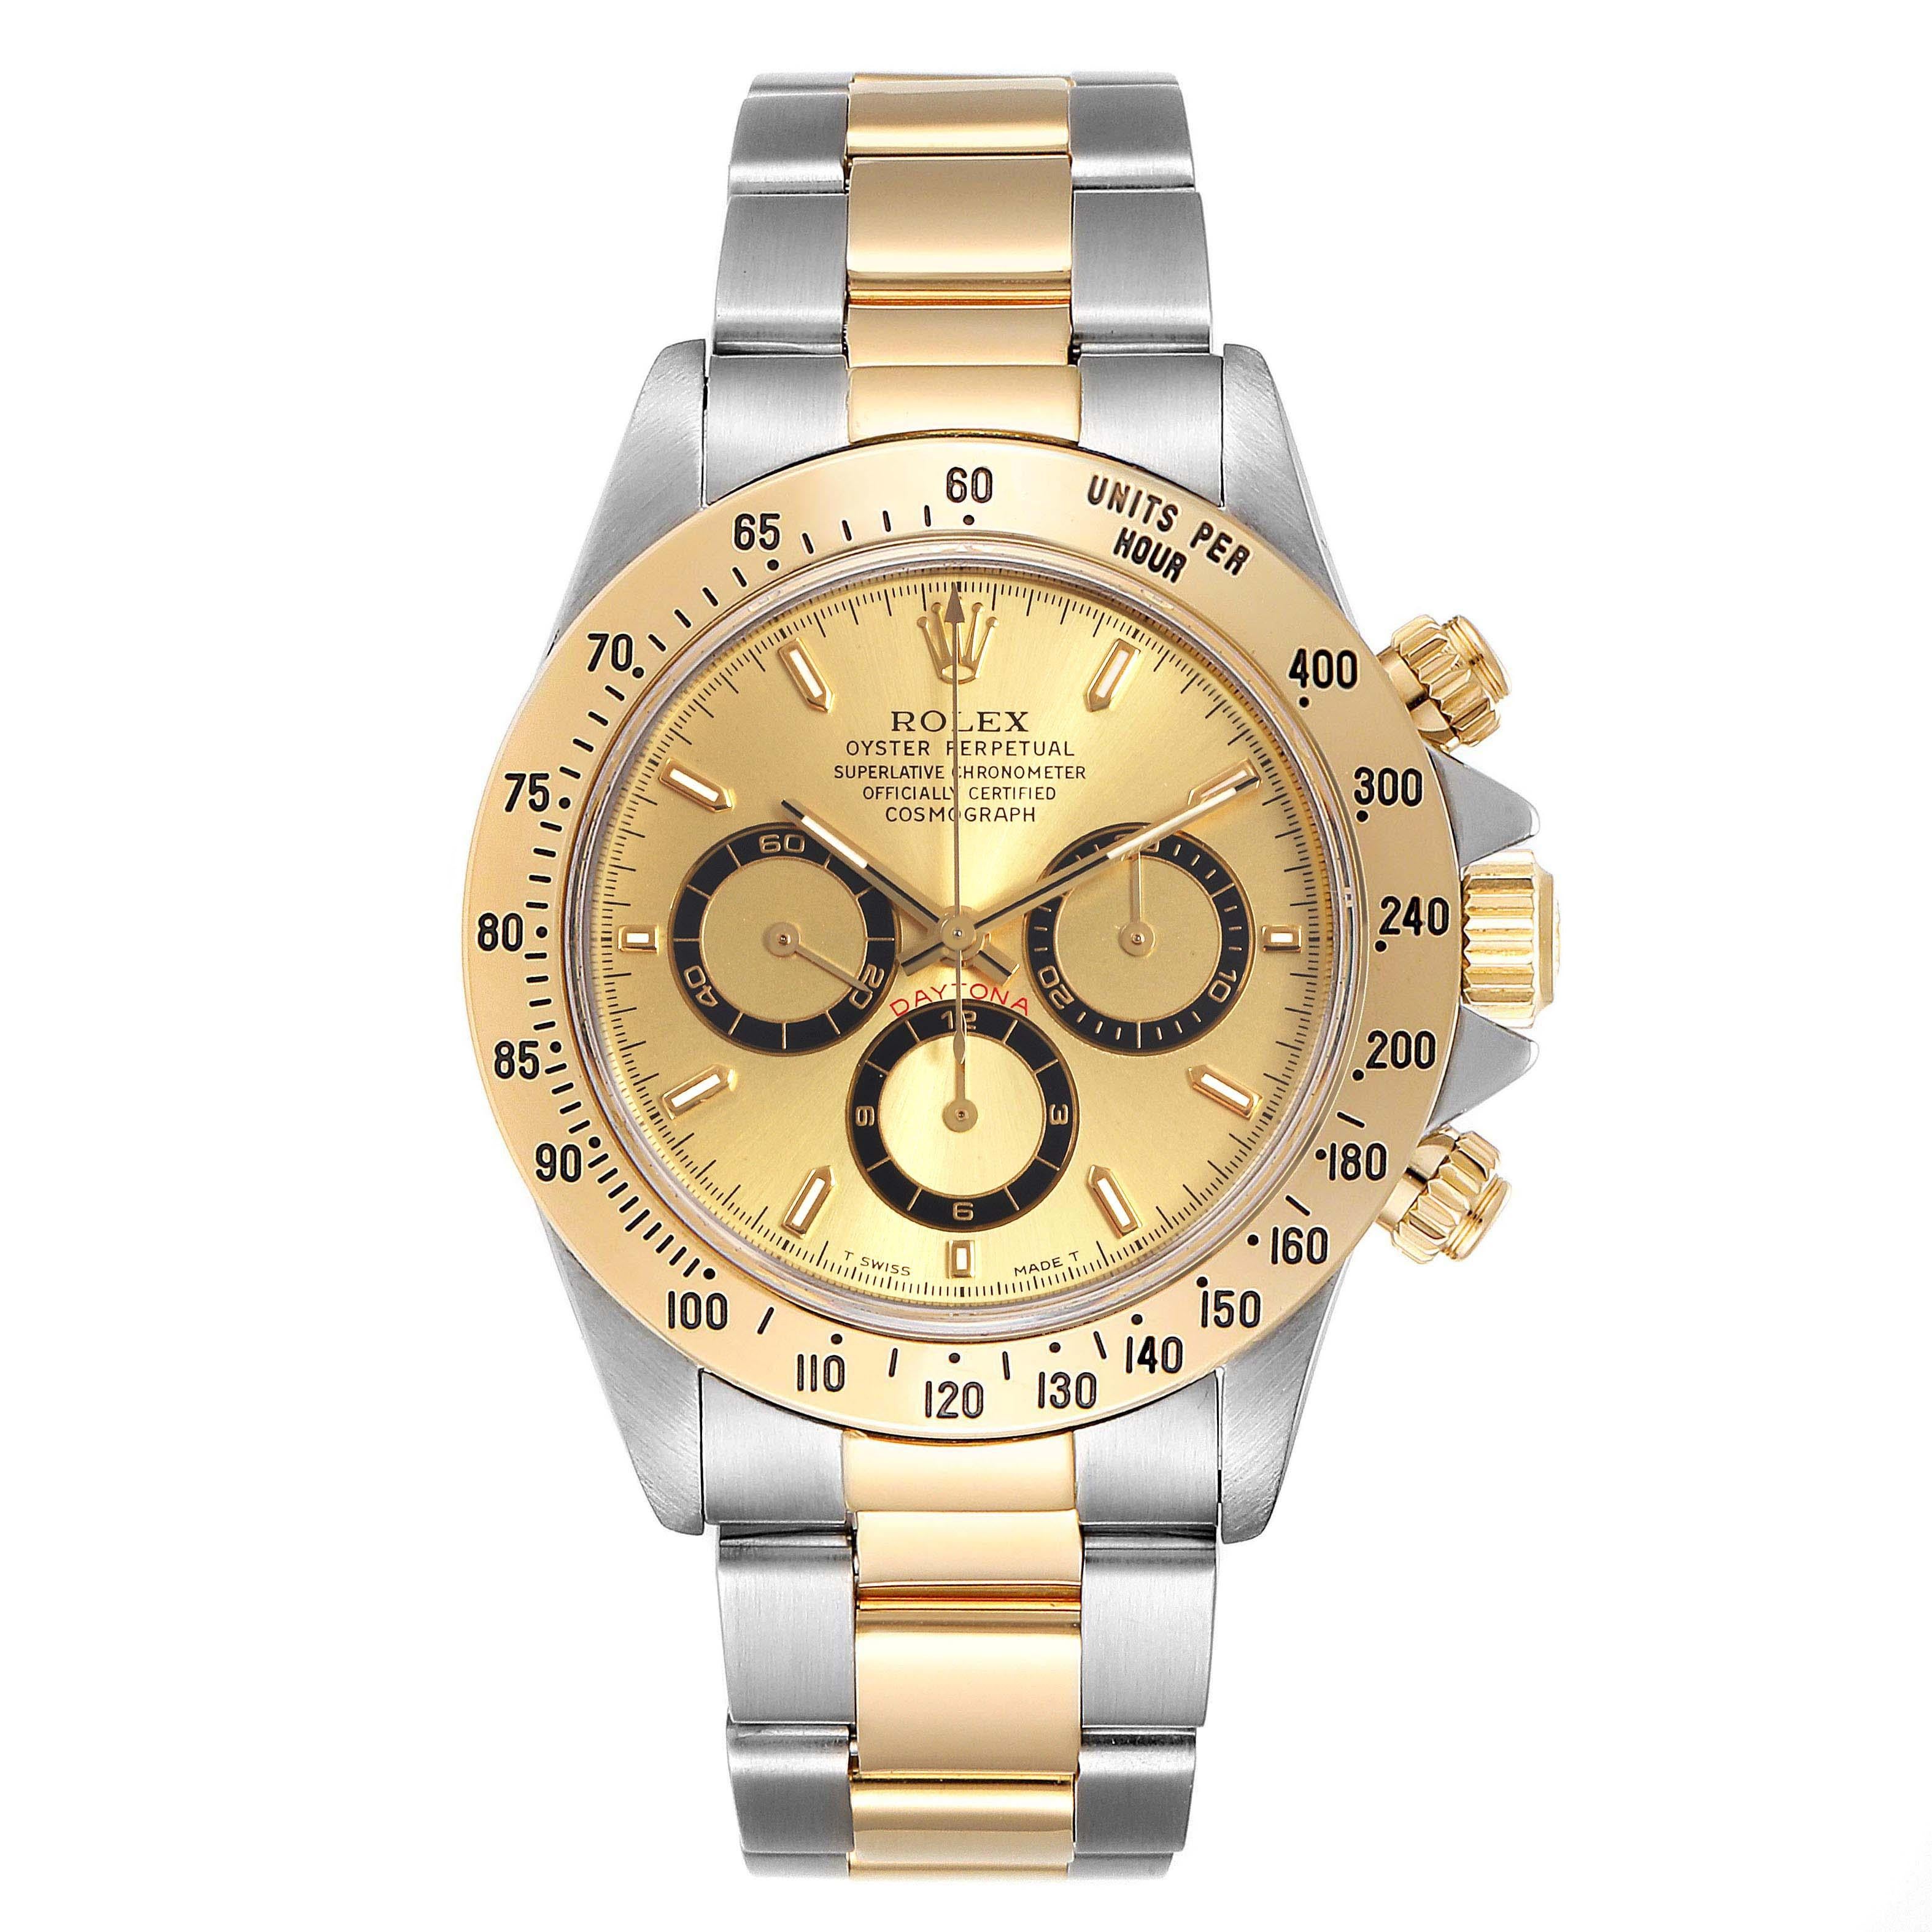 Rolex Daytona Steel Yellow Gold Mens Watch 16523 Box. Officially certified chronometer self-winding movement. Stainless steel and 18K yellow gold case 40 mm in diameter. Special screw-down push buttons. 18K yellow gold tachymeter engraved bezel.